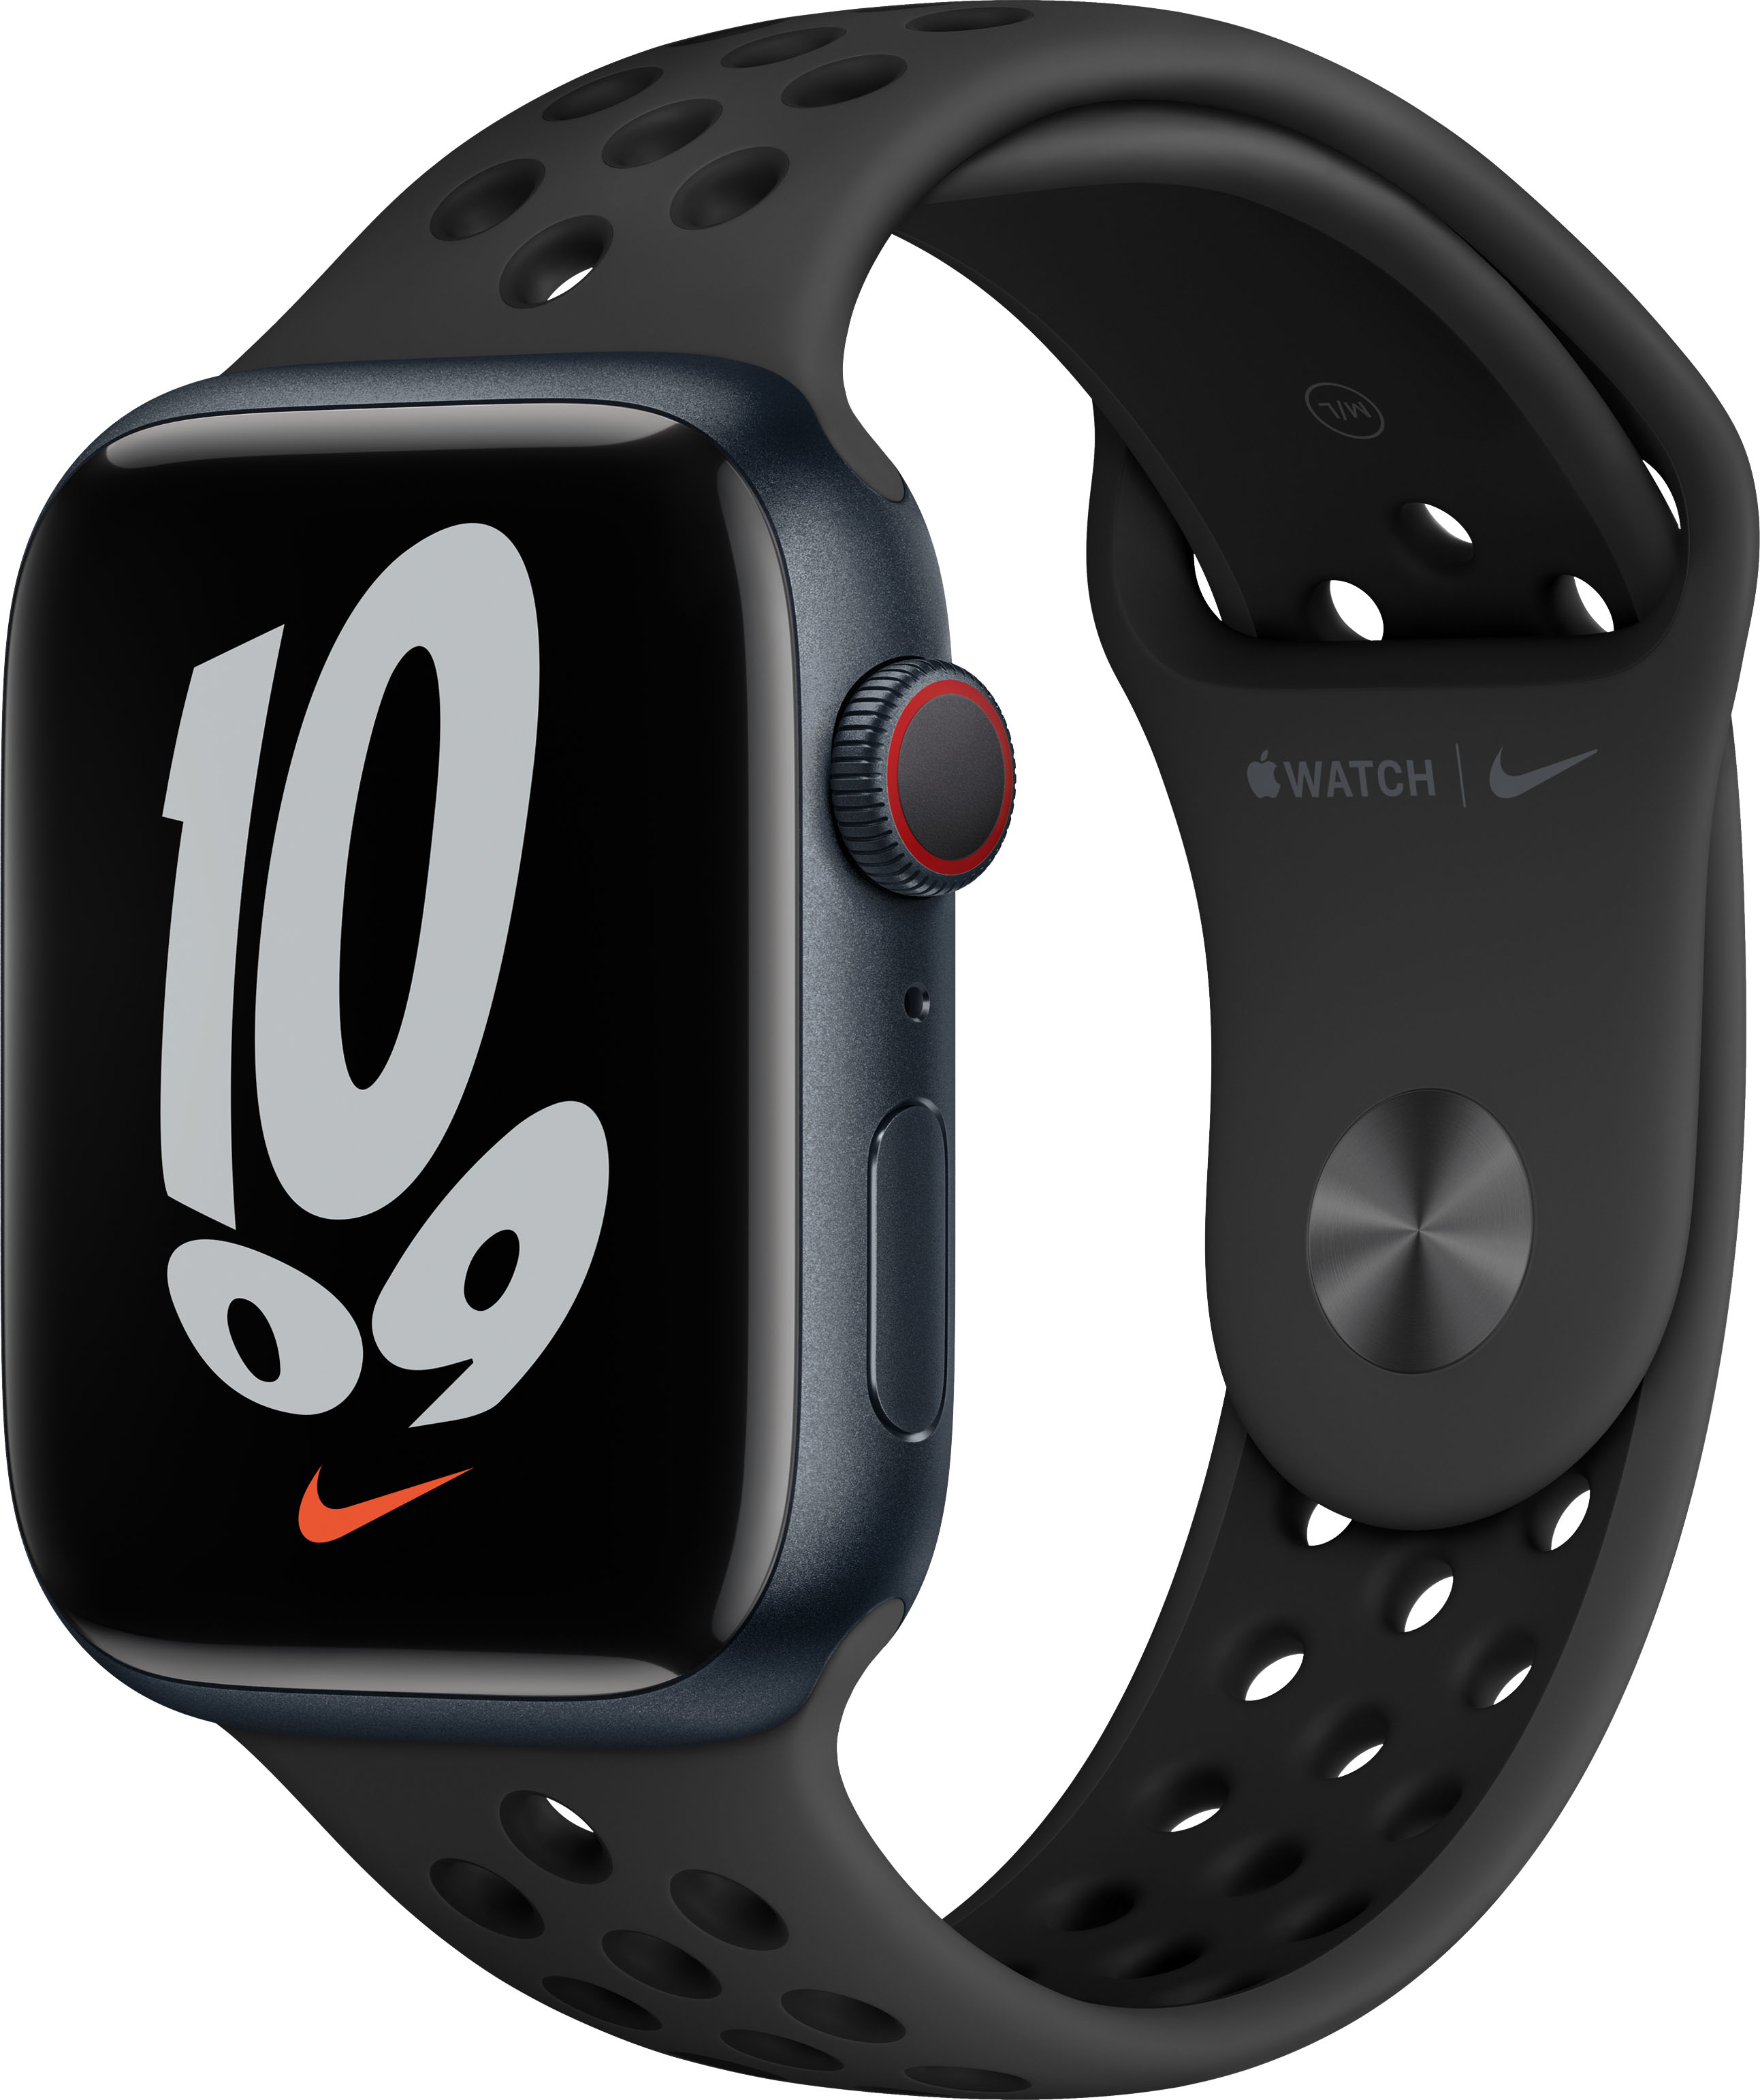 Apple Watch Series 7 (GPS + Cellular) Midnight Aluminum with Anthracite/Black Nike Sport Band Midnight (Verizon) MKJL3LL/A - Best Buy